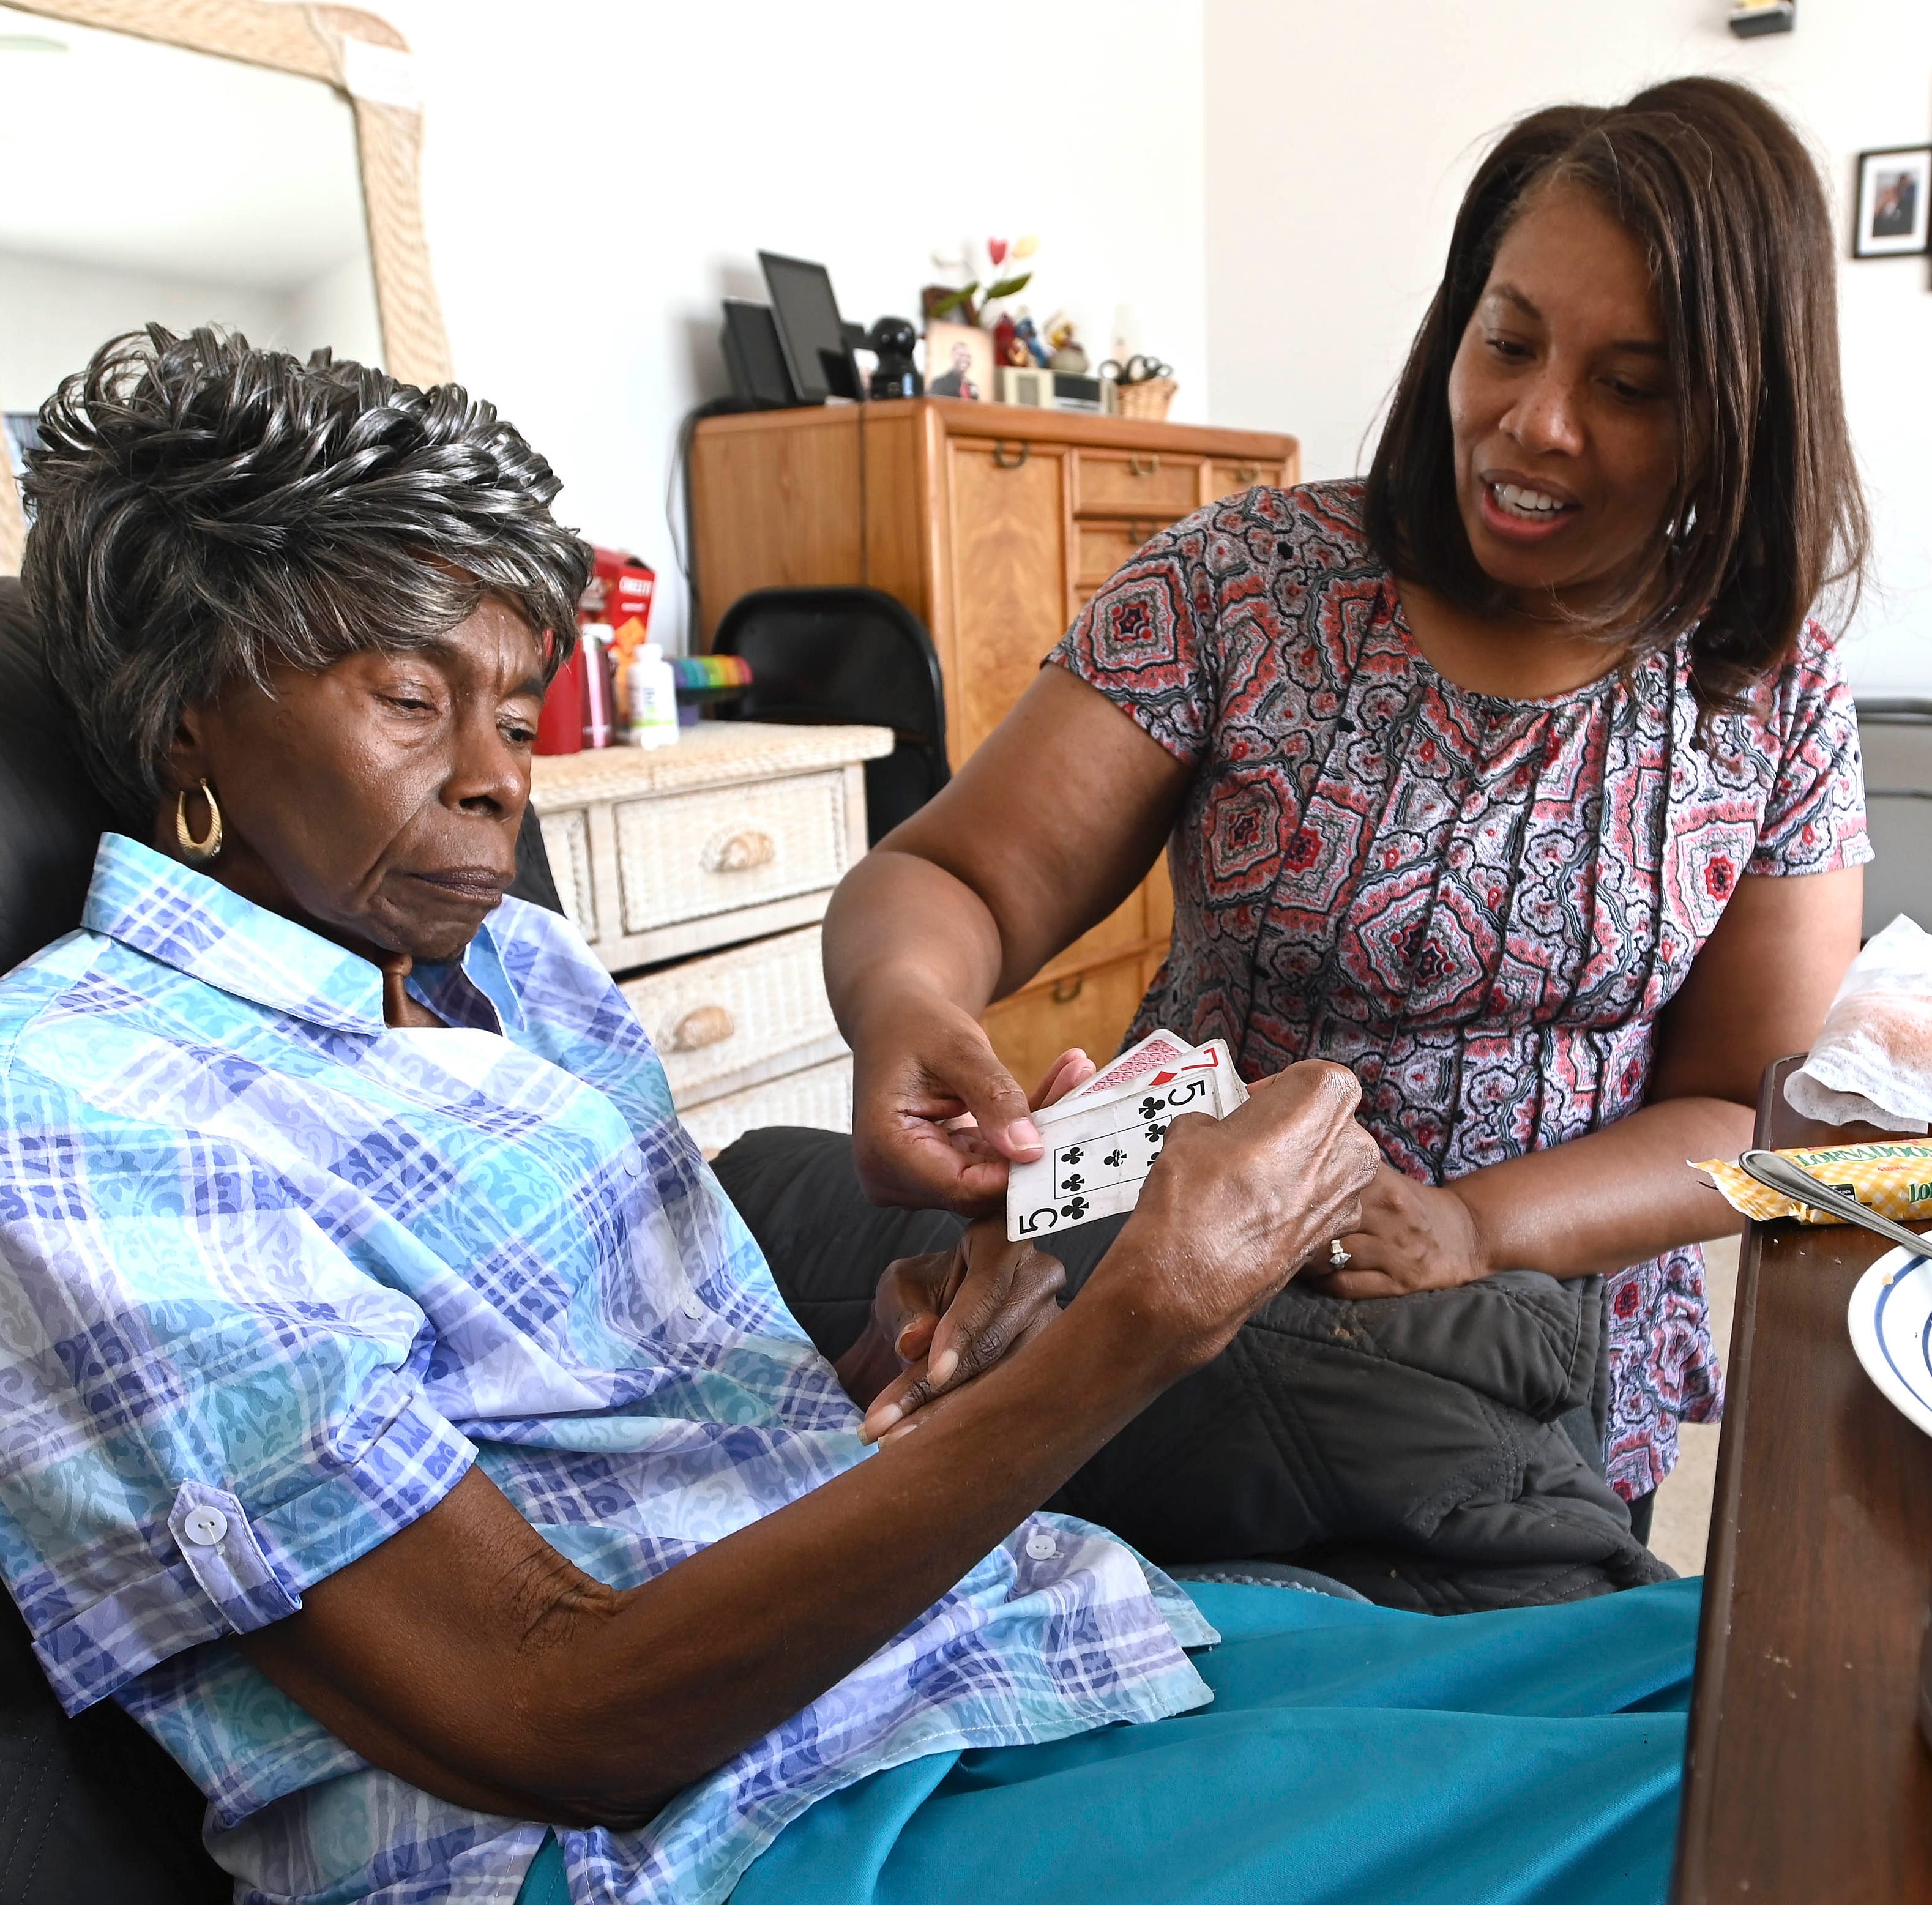 Doria Rainey, right, hands her mother, Mariea Claxton, a deck of cards for later. Rainey is her mother's full-time caregiver as Claxton suffers from dementia.